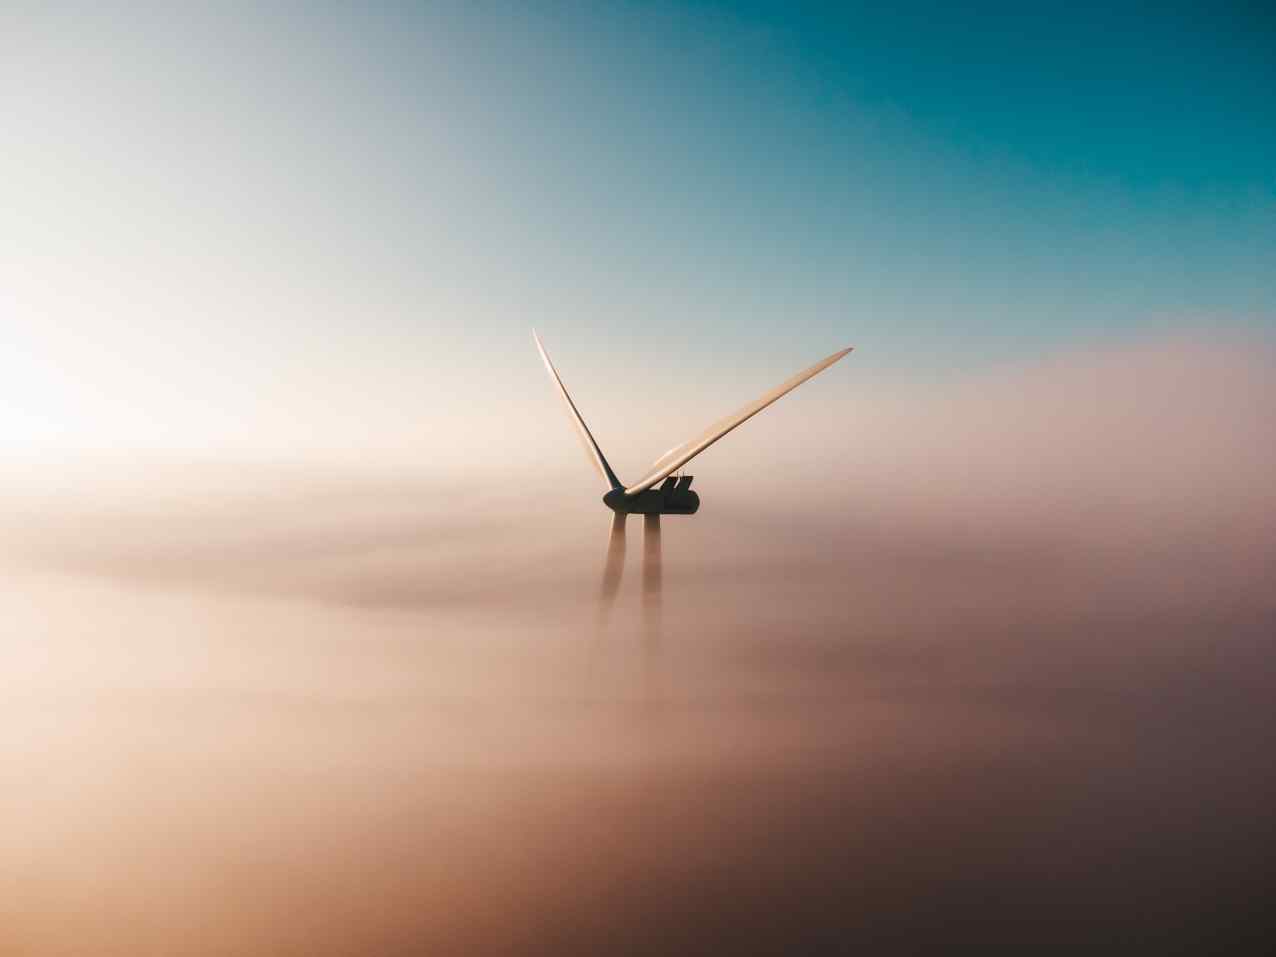 A windmill rising above the clouds.